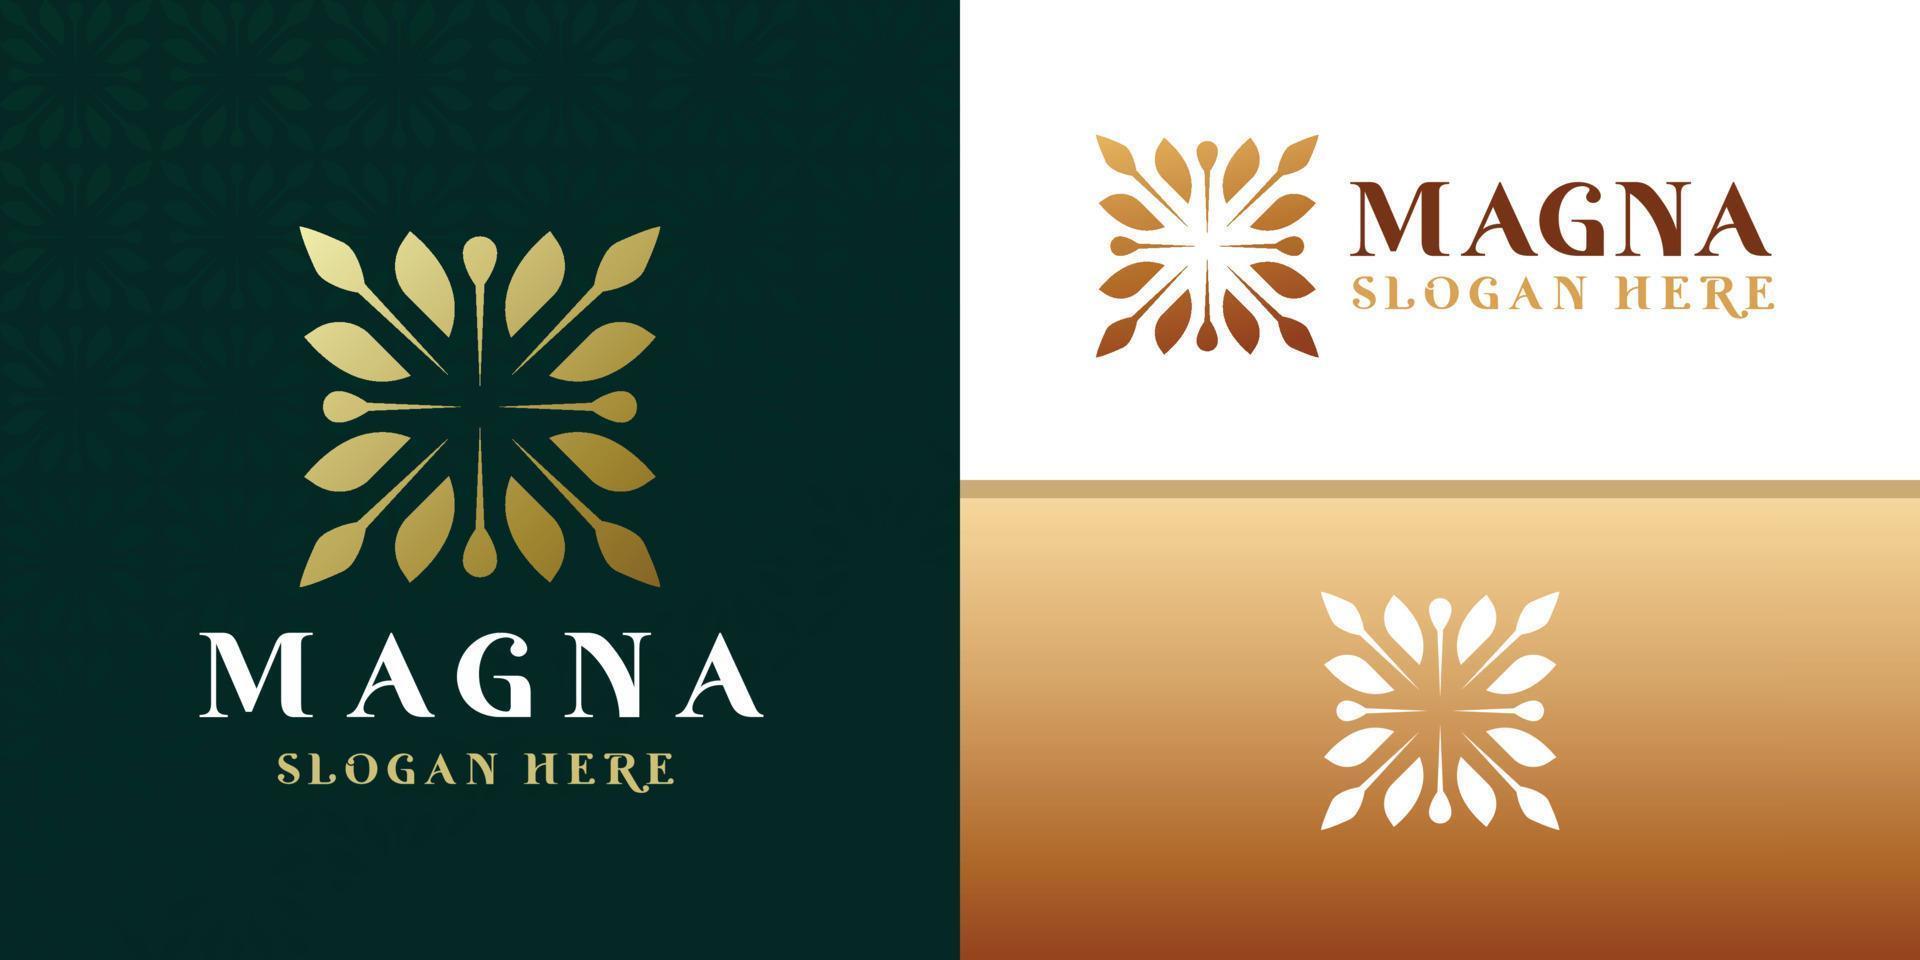 Unique Circular logo illustration. Mandala flat icon for your business. Ayurveda, spa, yoga company identity. Advertising or web startup zen symbol design. Moroccan tile style. Vector isolated sign.